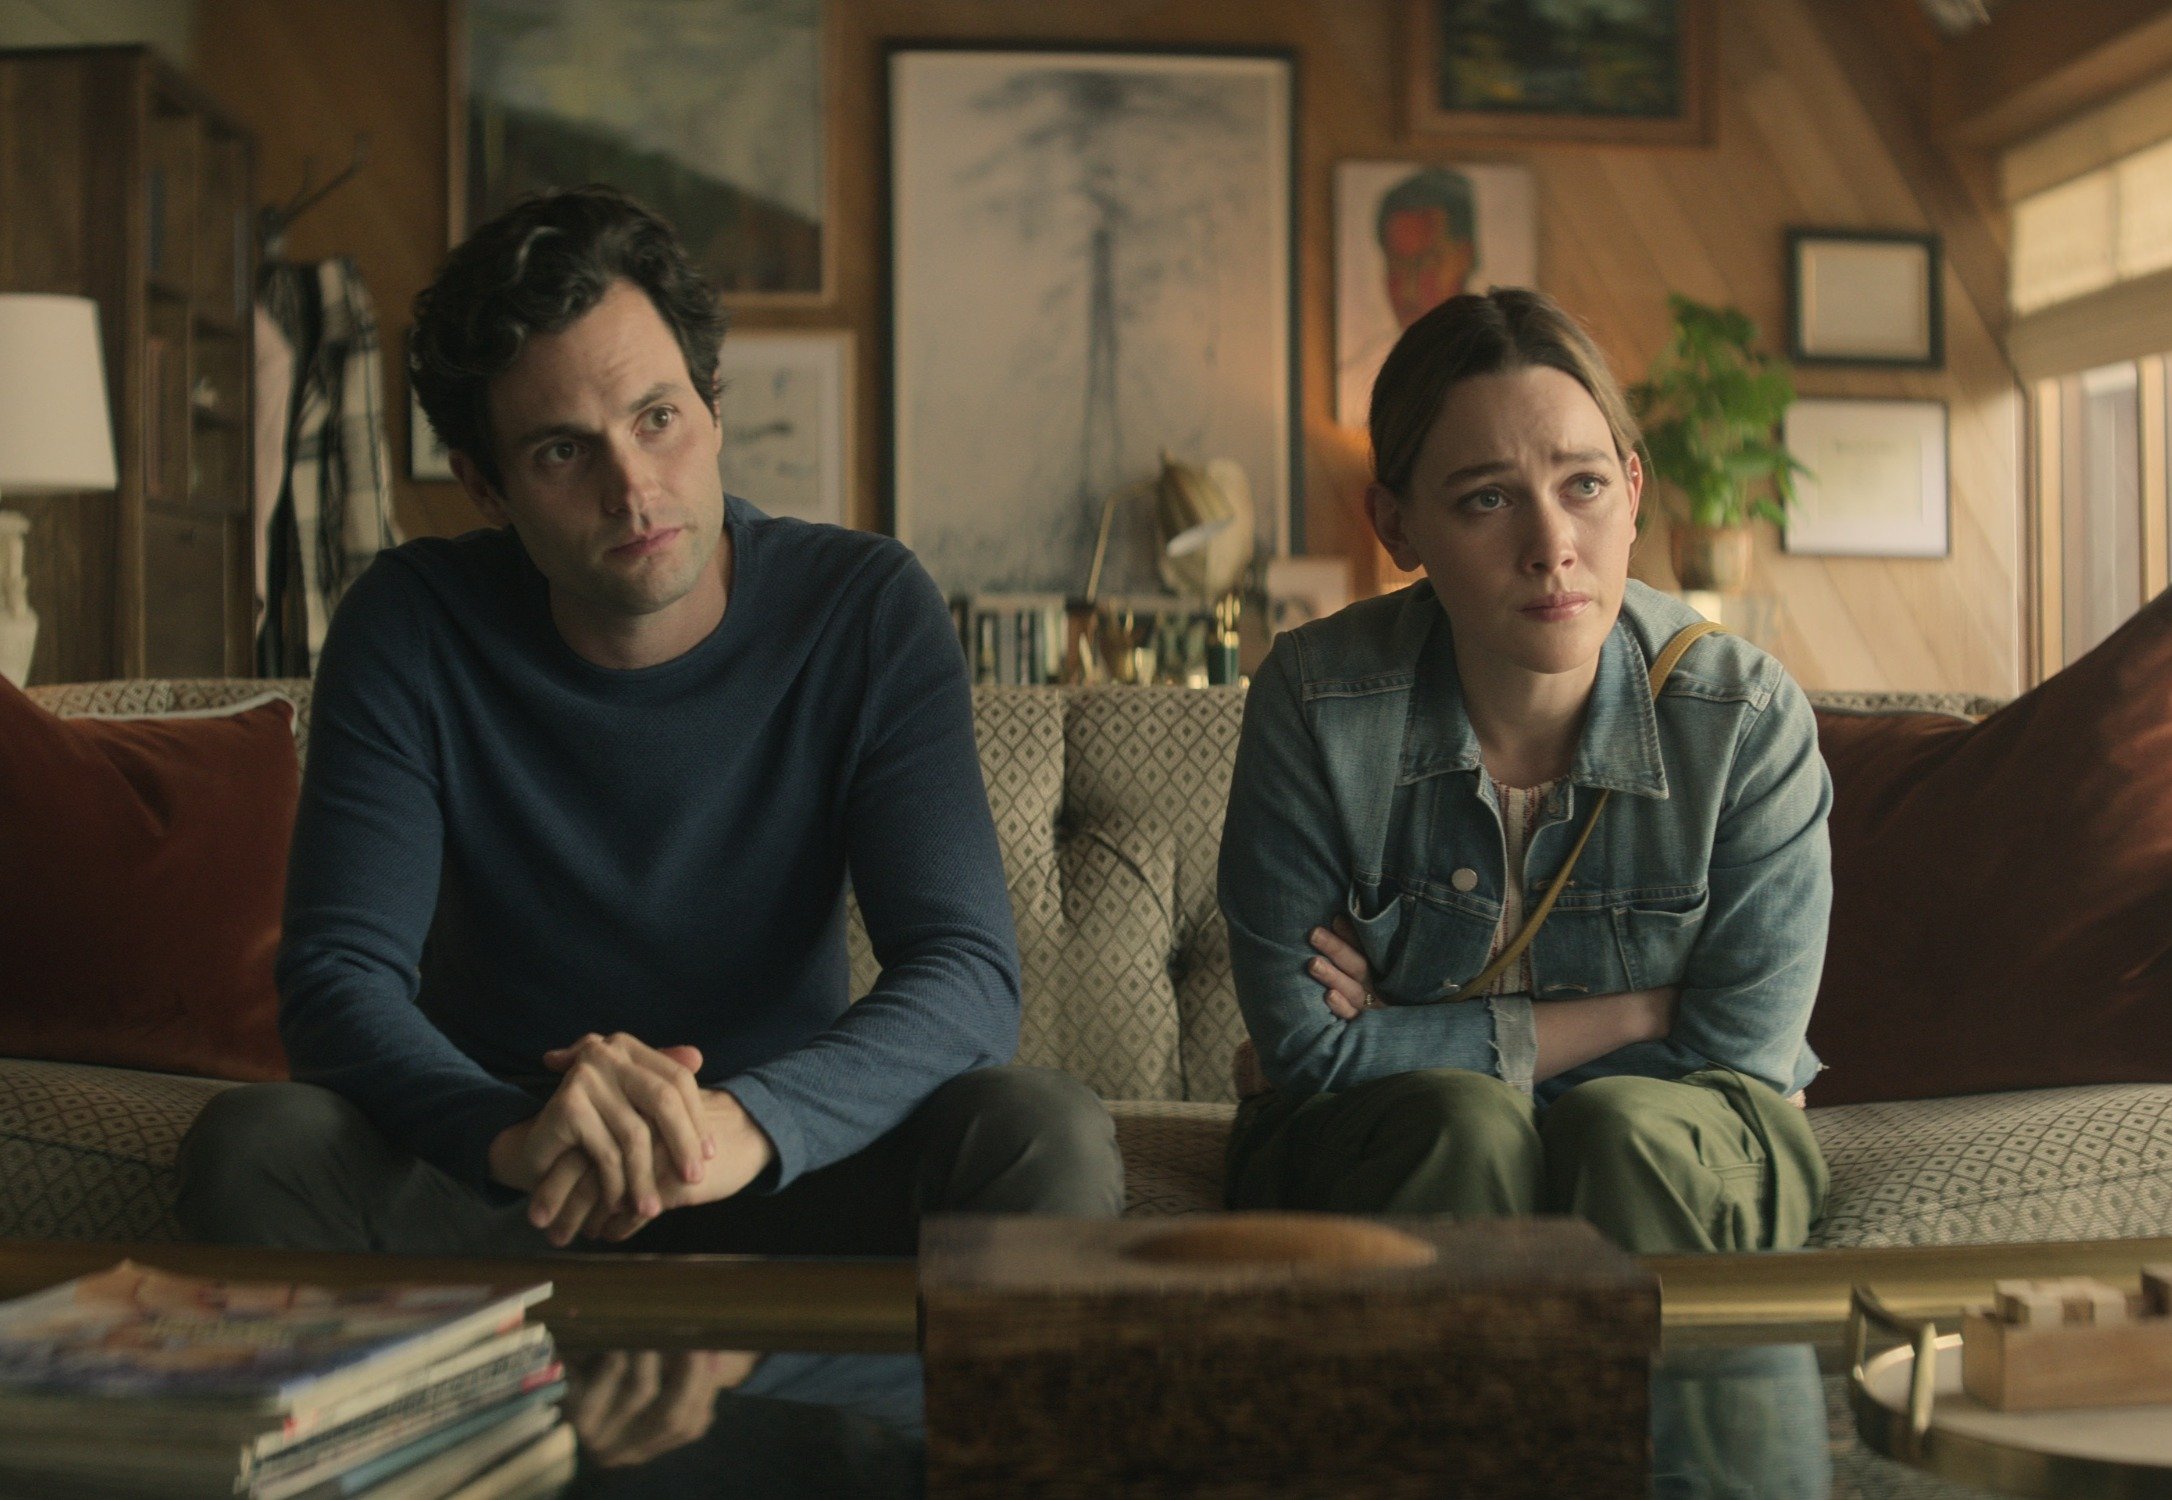 Penn Badgley and Victoria Pedretti in 'You' Season 3 on Netflix. They're sitting on a couch staring forward, where their therapist sits off-screen.